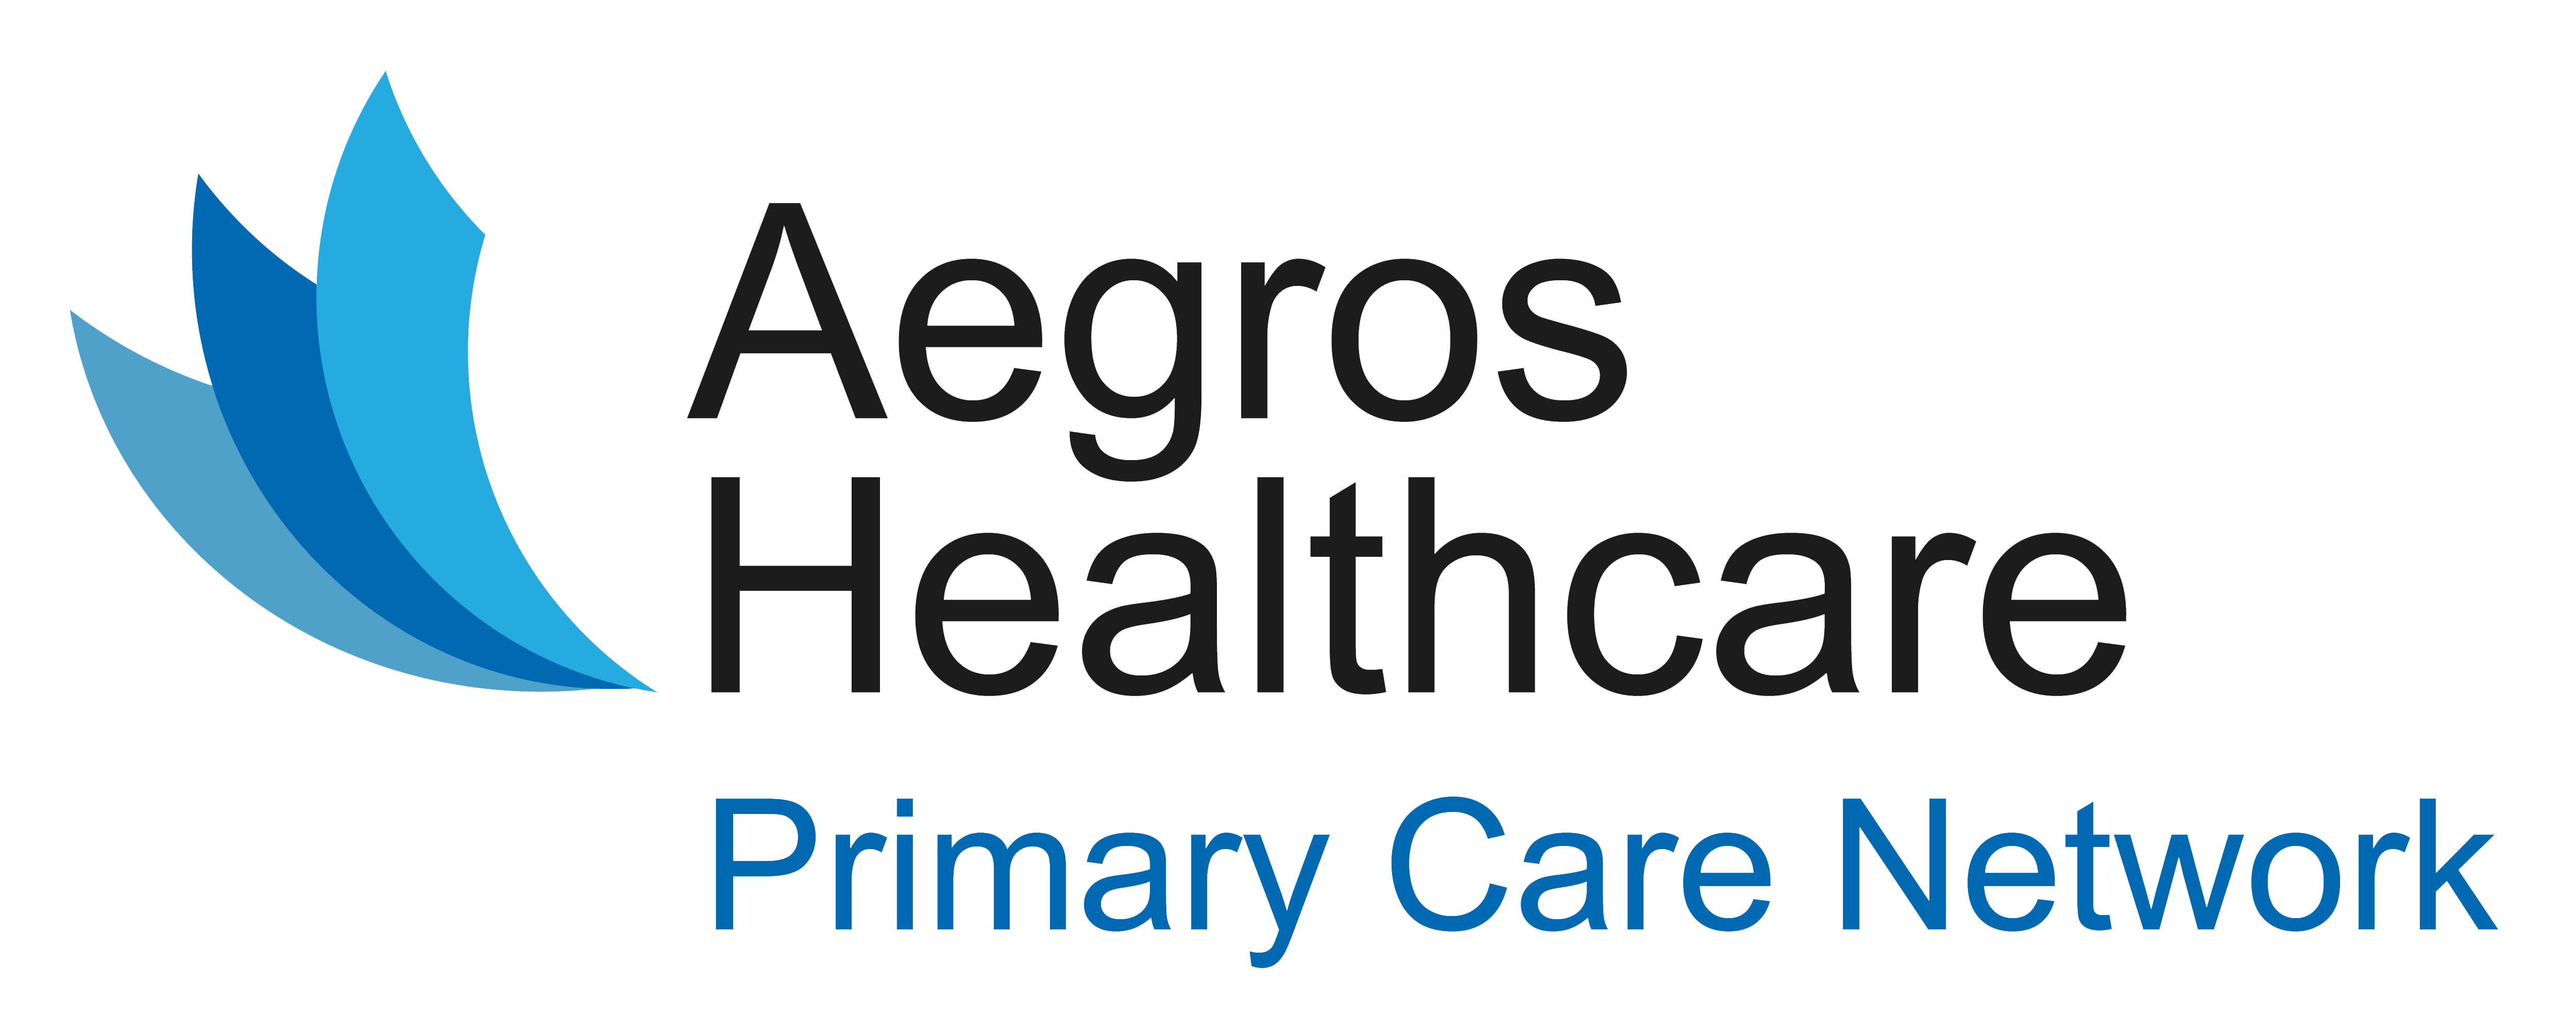 The Aegros Primary Care Network logo